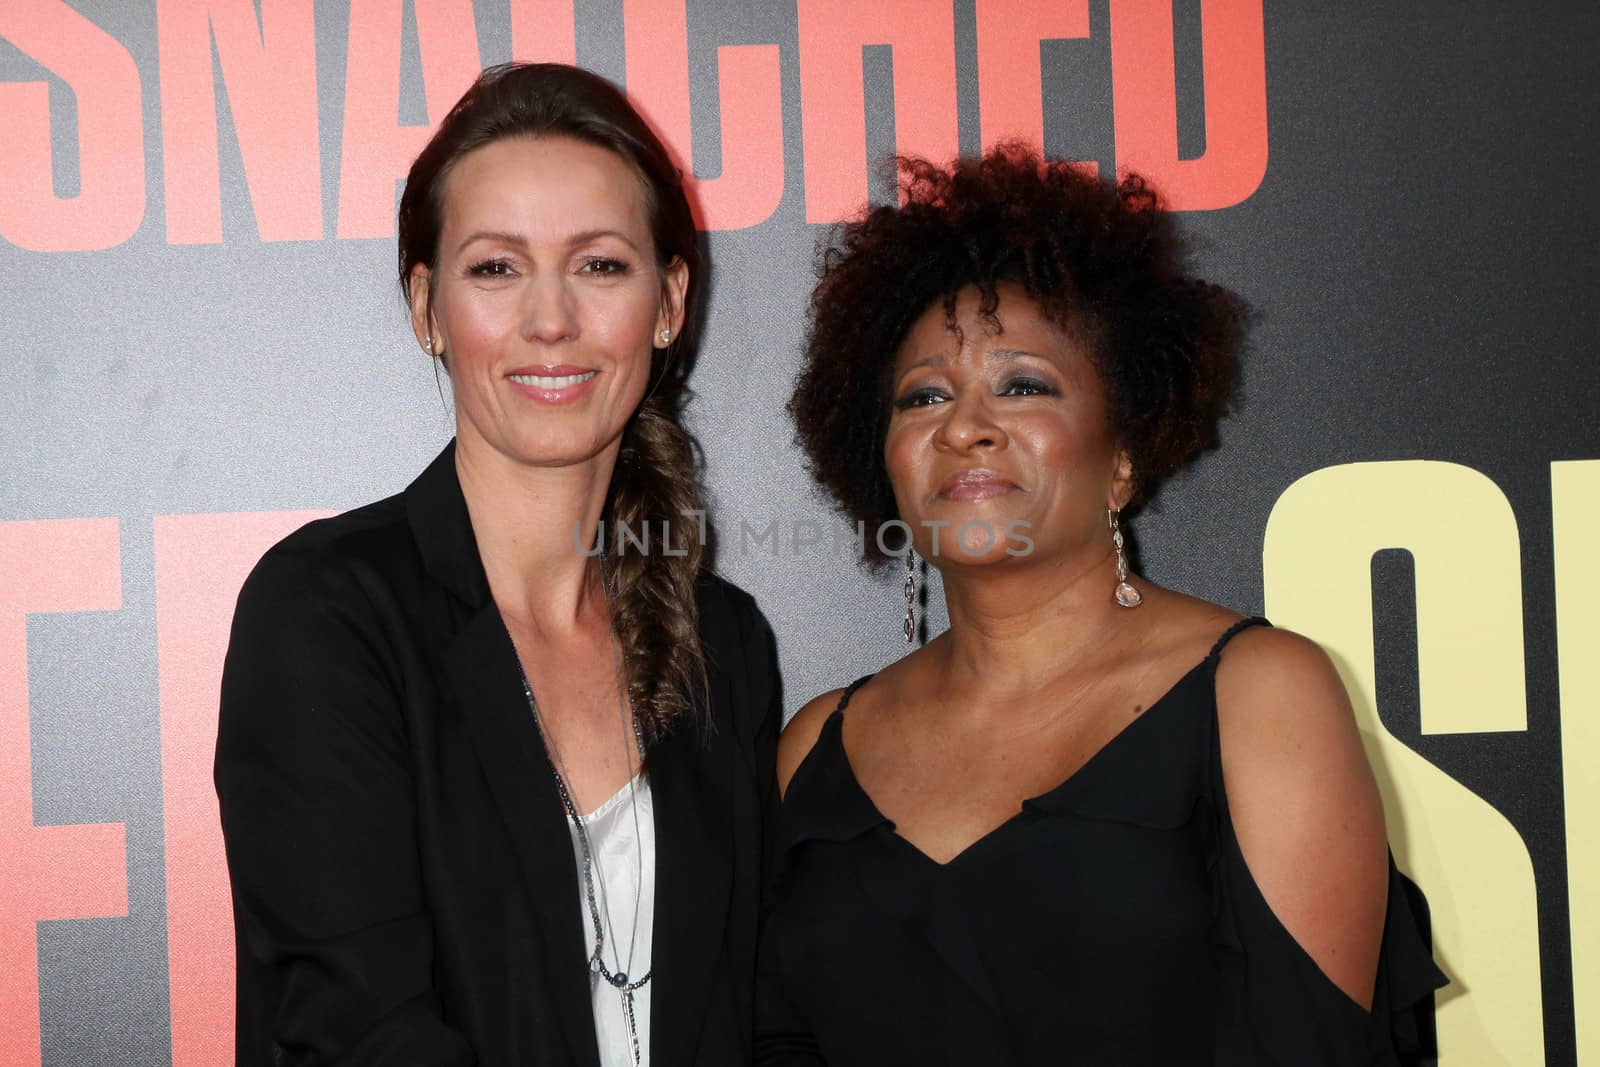 Wanda Sykes, Alex Sykes at the "Snatched" World Premiere, Village Theater, Westwood, CA 05-10-17/ImageCollect by ImageCollect